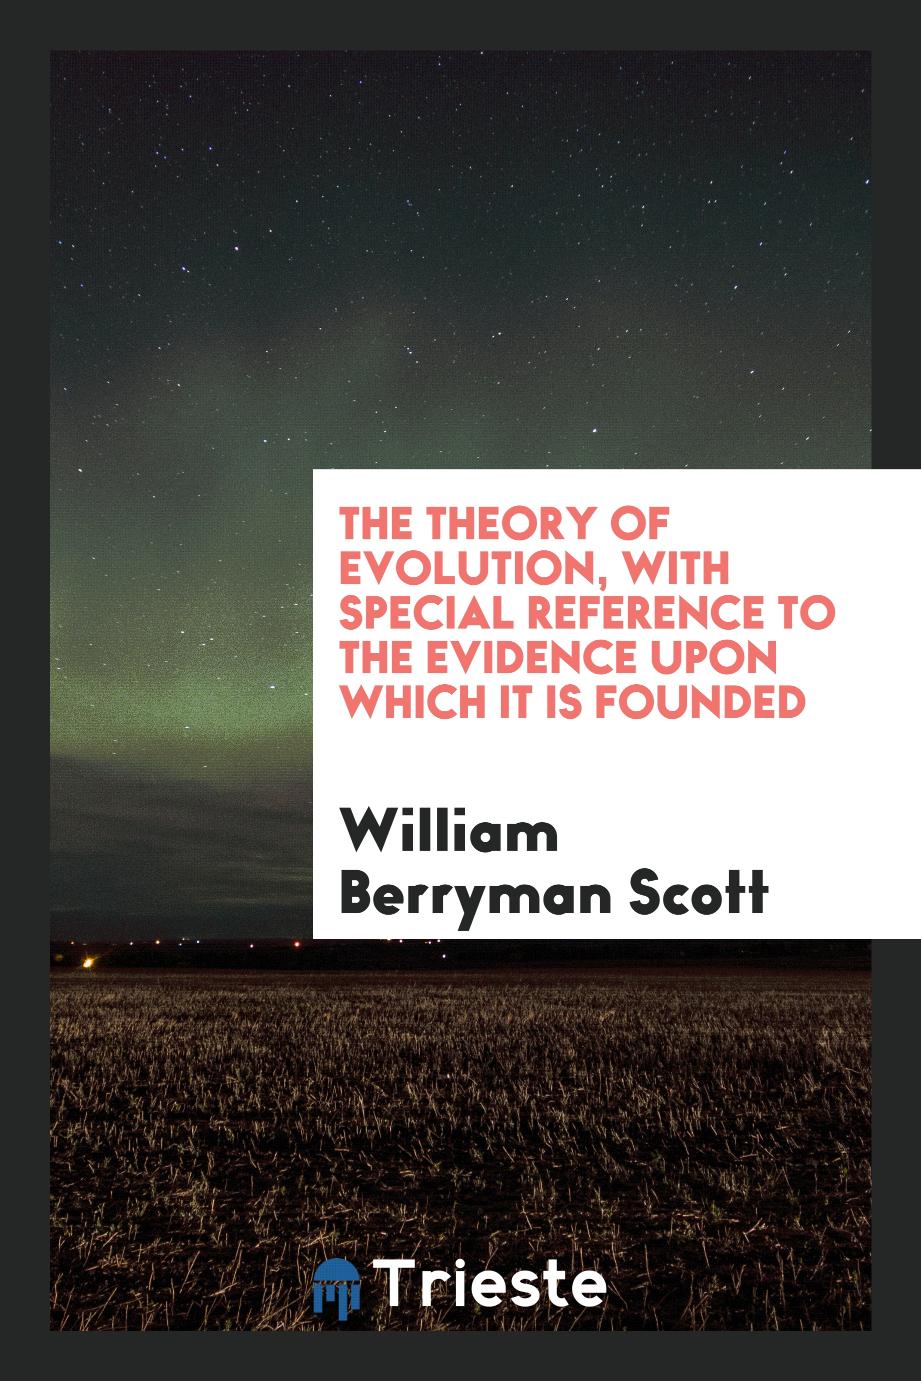 The theory of evolution, with special reference to the evidence upon which it is founded